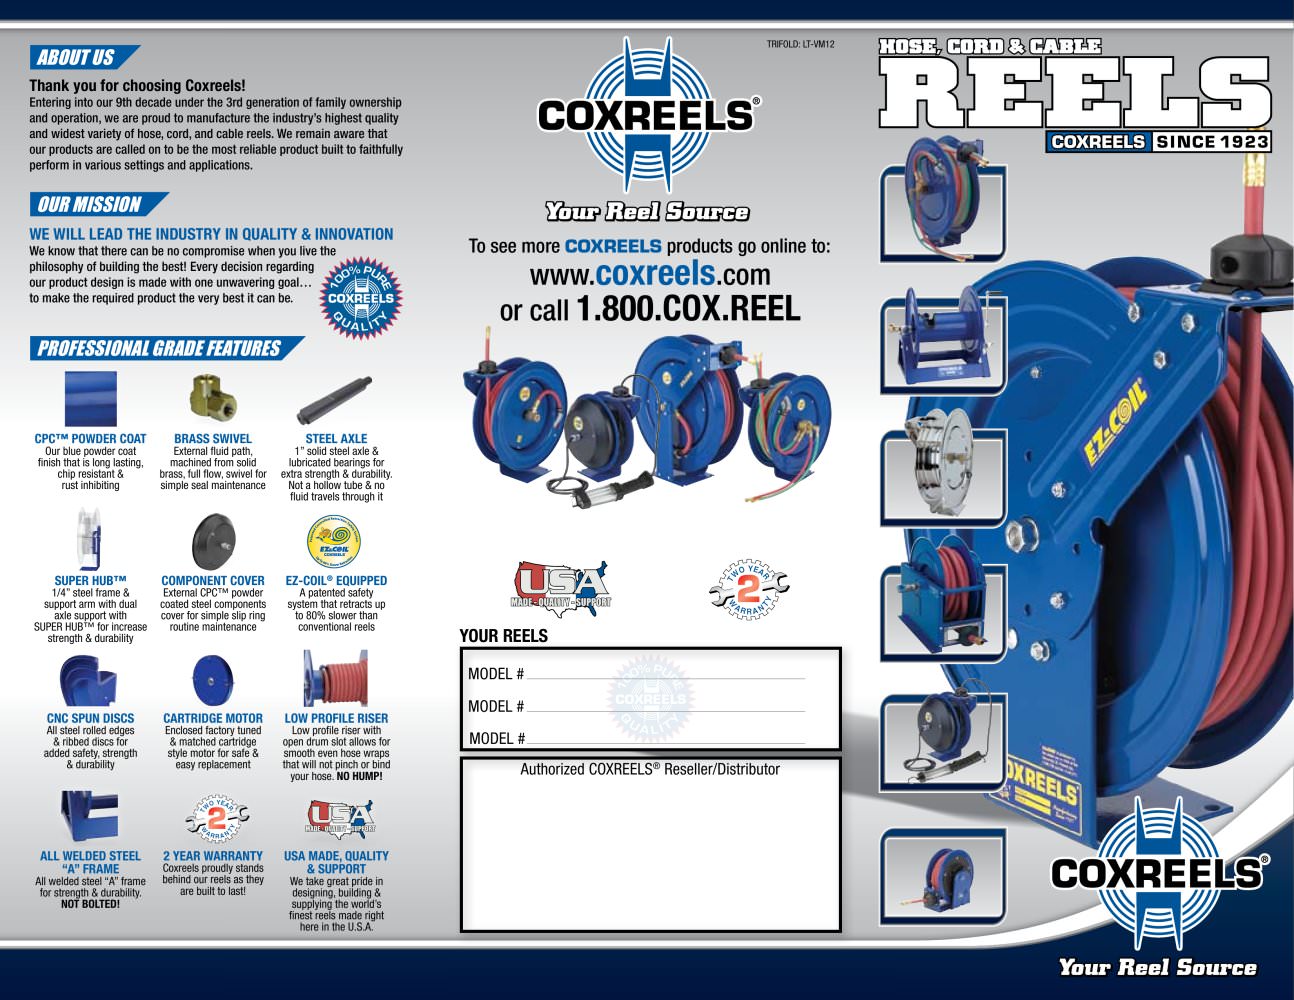 HOSE REELS by COXREELS – North American Pressure Wash Outlet